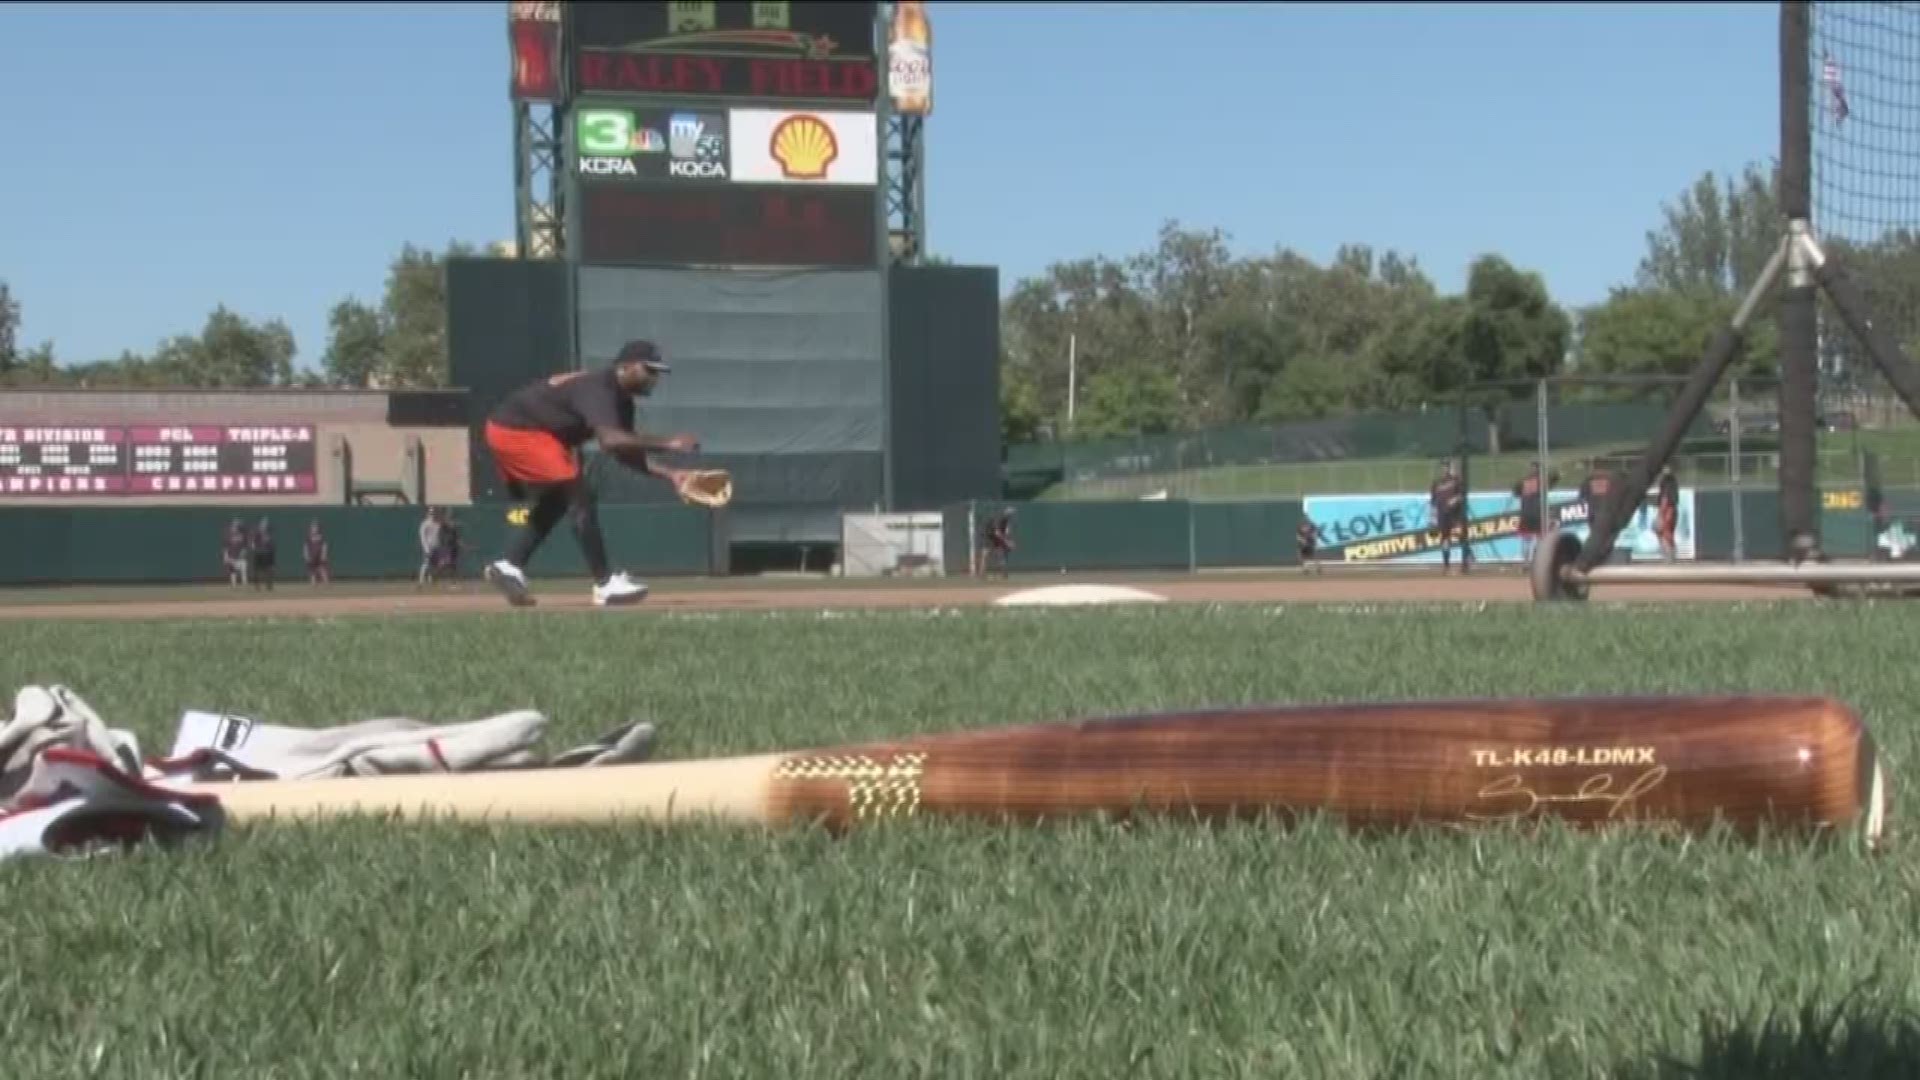 San Francisco Giants' Pablo Sandoval plays with River Cats